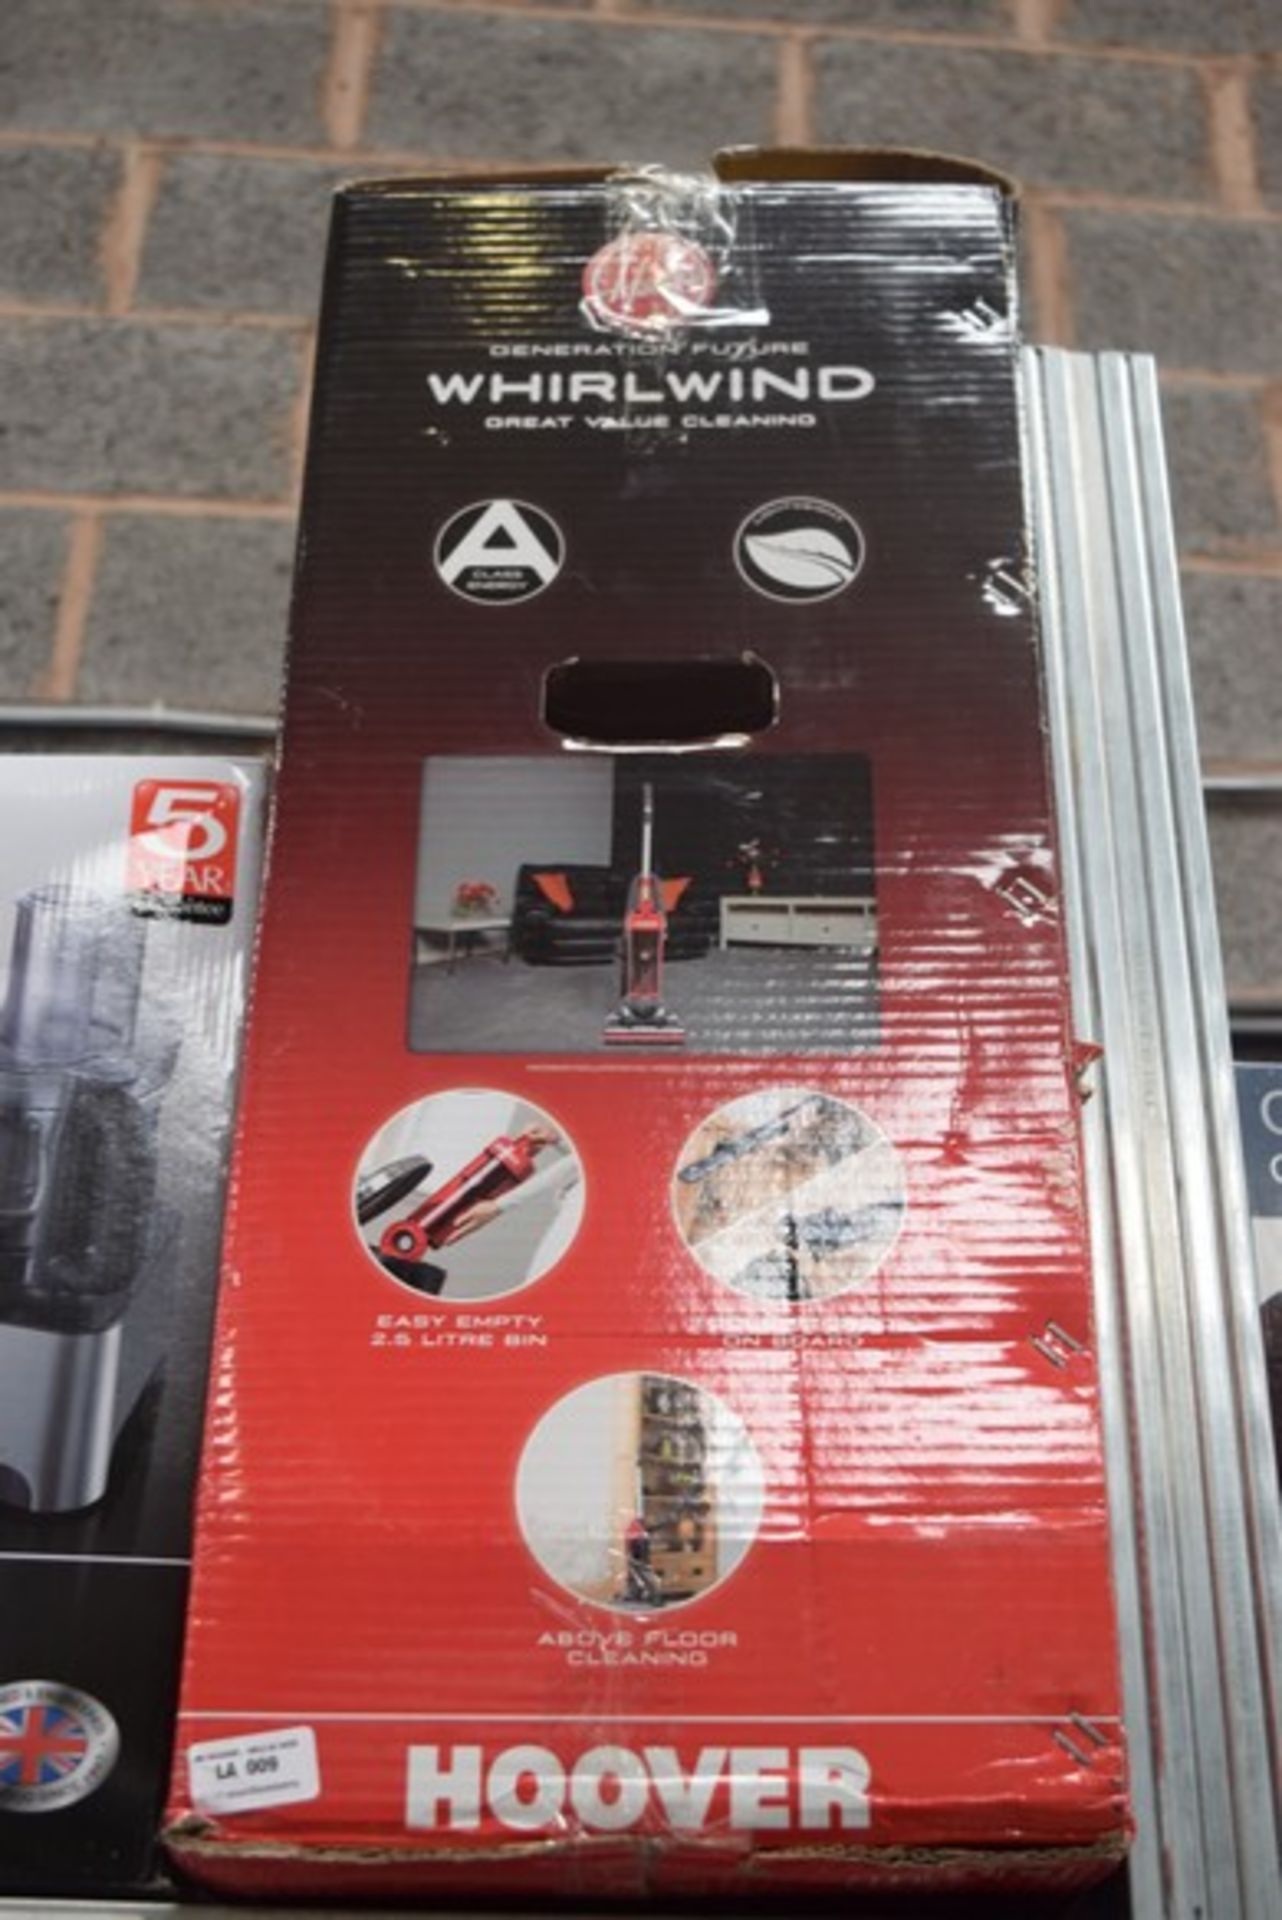 1 x BOXED HOOVER WHIRLWIND VACUUM CLEANER RRP £65 12.09.17 3374650 *PLEASE NOTE THAT THE BID PRICE